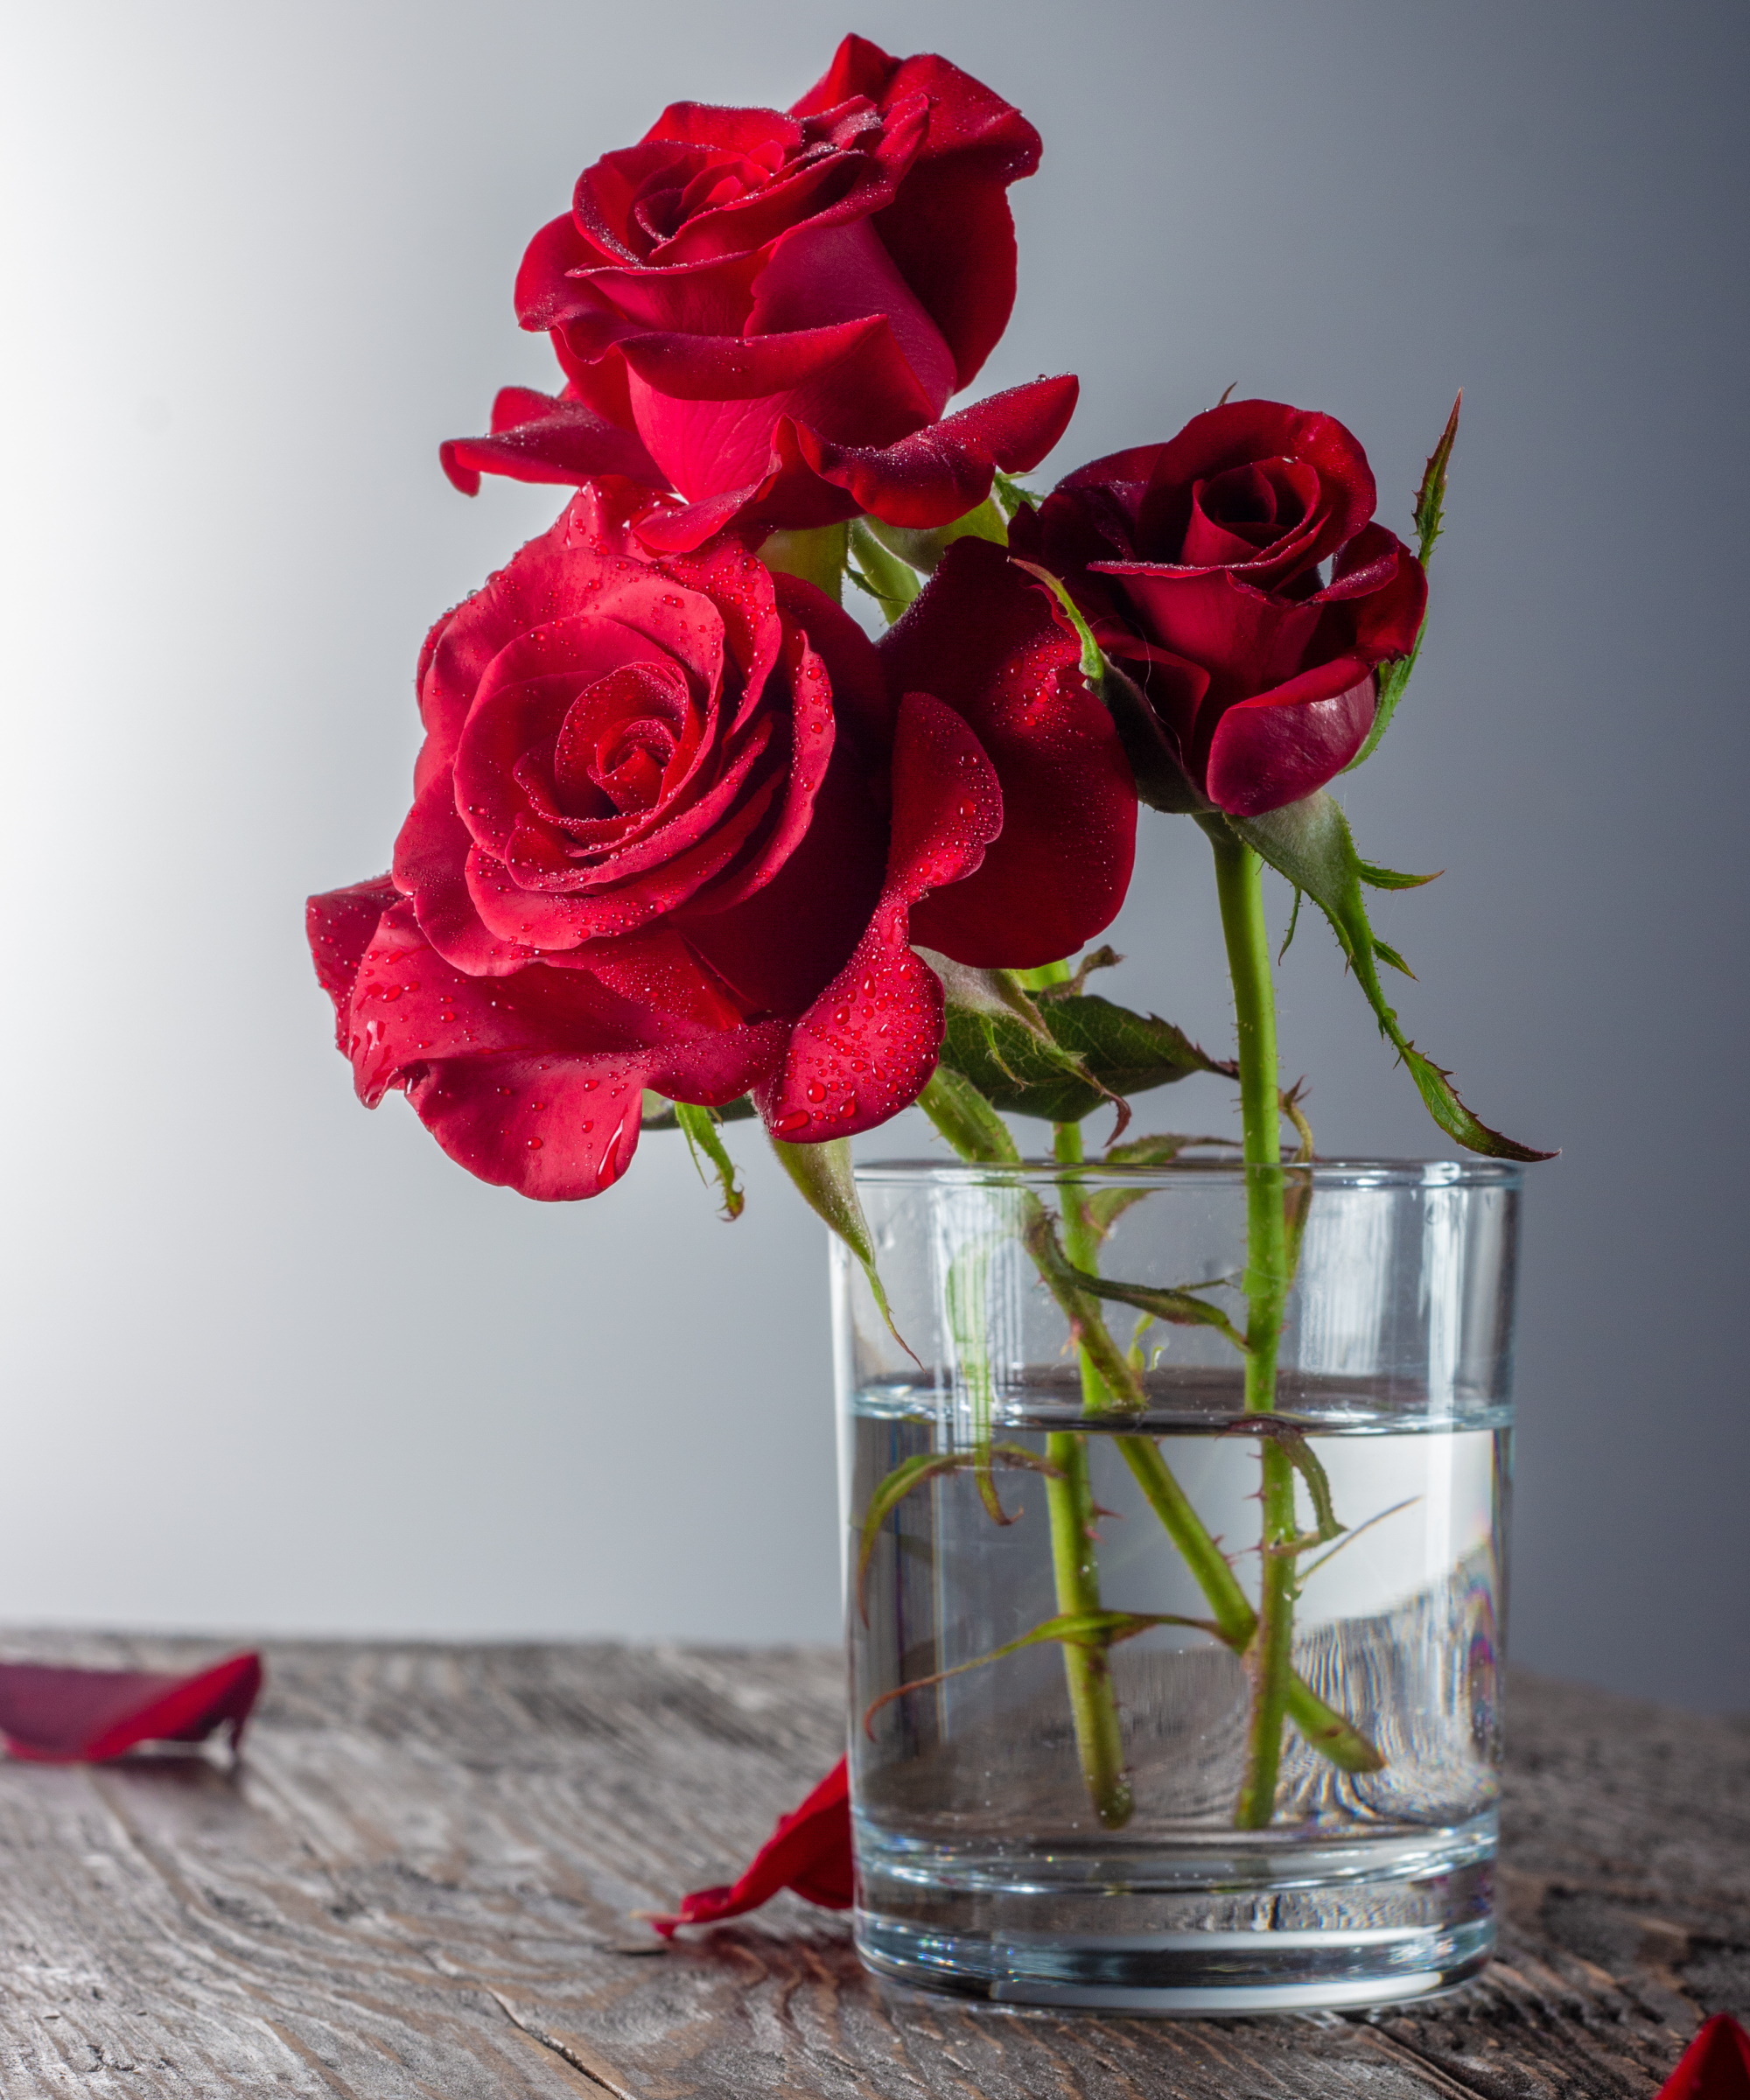 amazon, have you tried putting rose cuttings in water? experts say it's an easy way to multiply your flowers